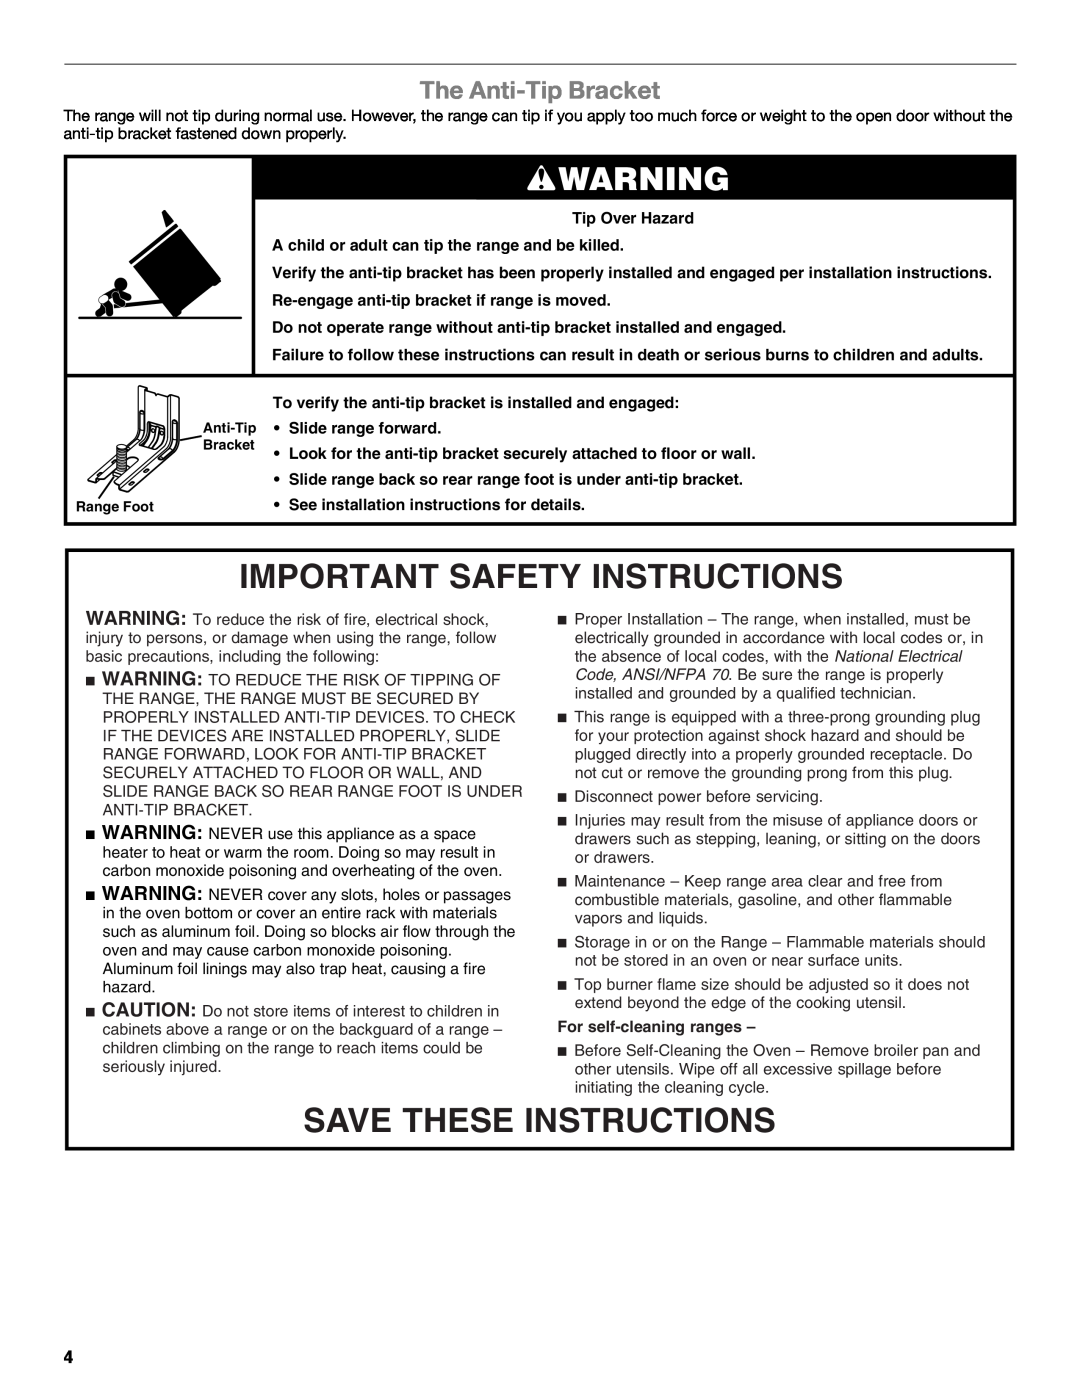 Amana standard cleaning gas range manual The Anti-Tip Bracket, Important Safety Instructions, Save These Instructions 